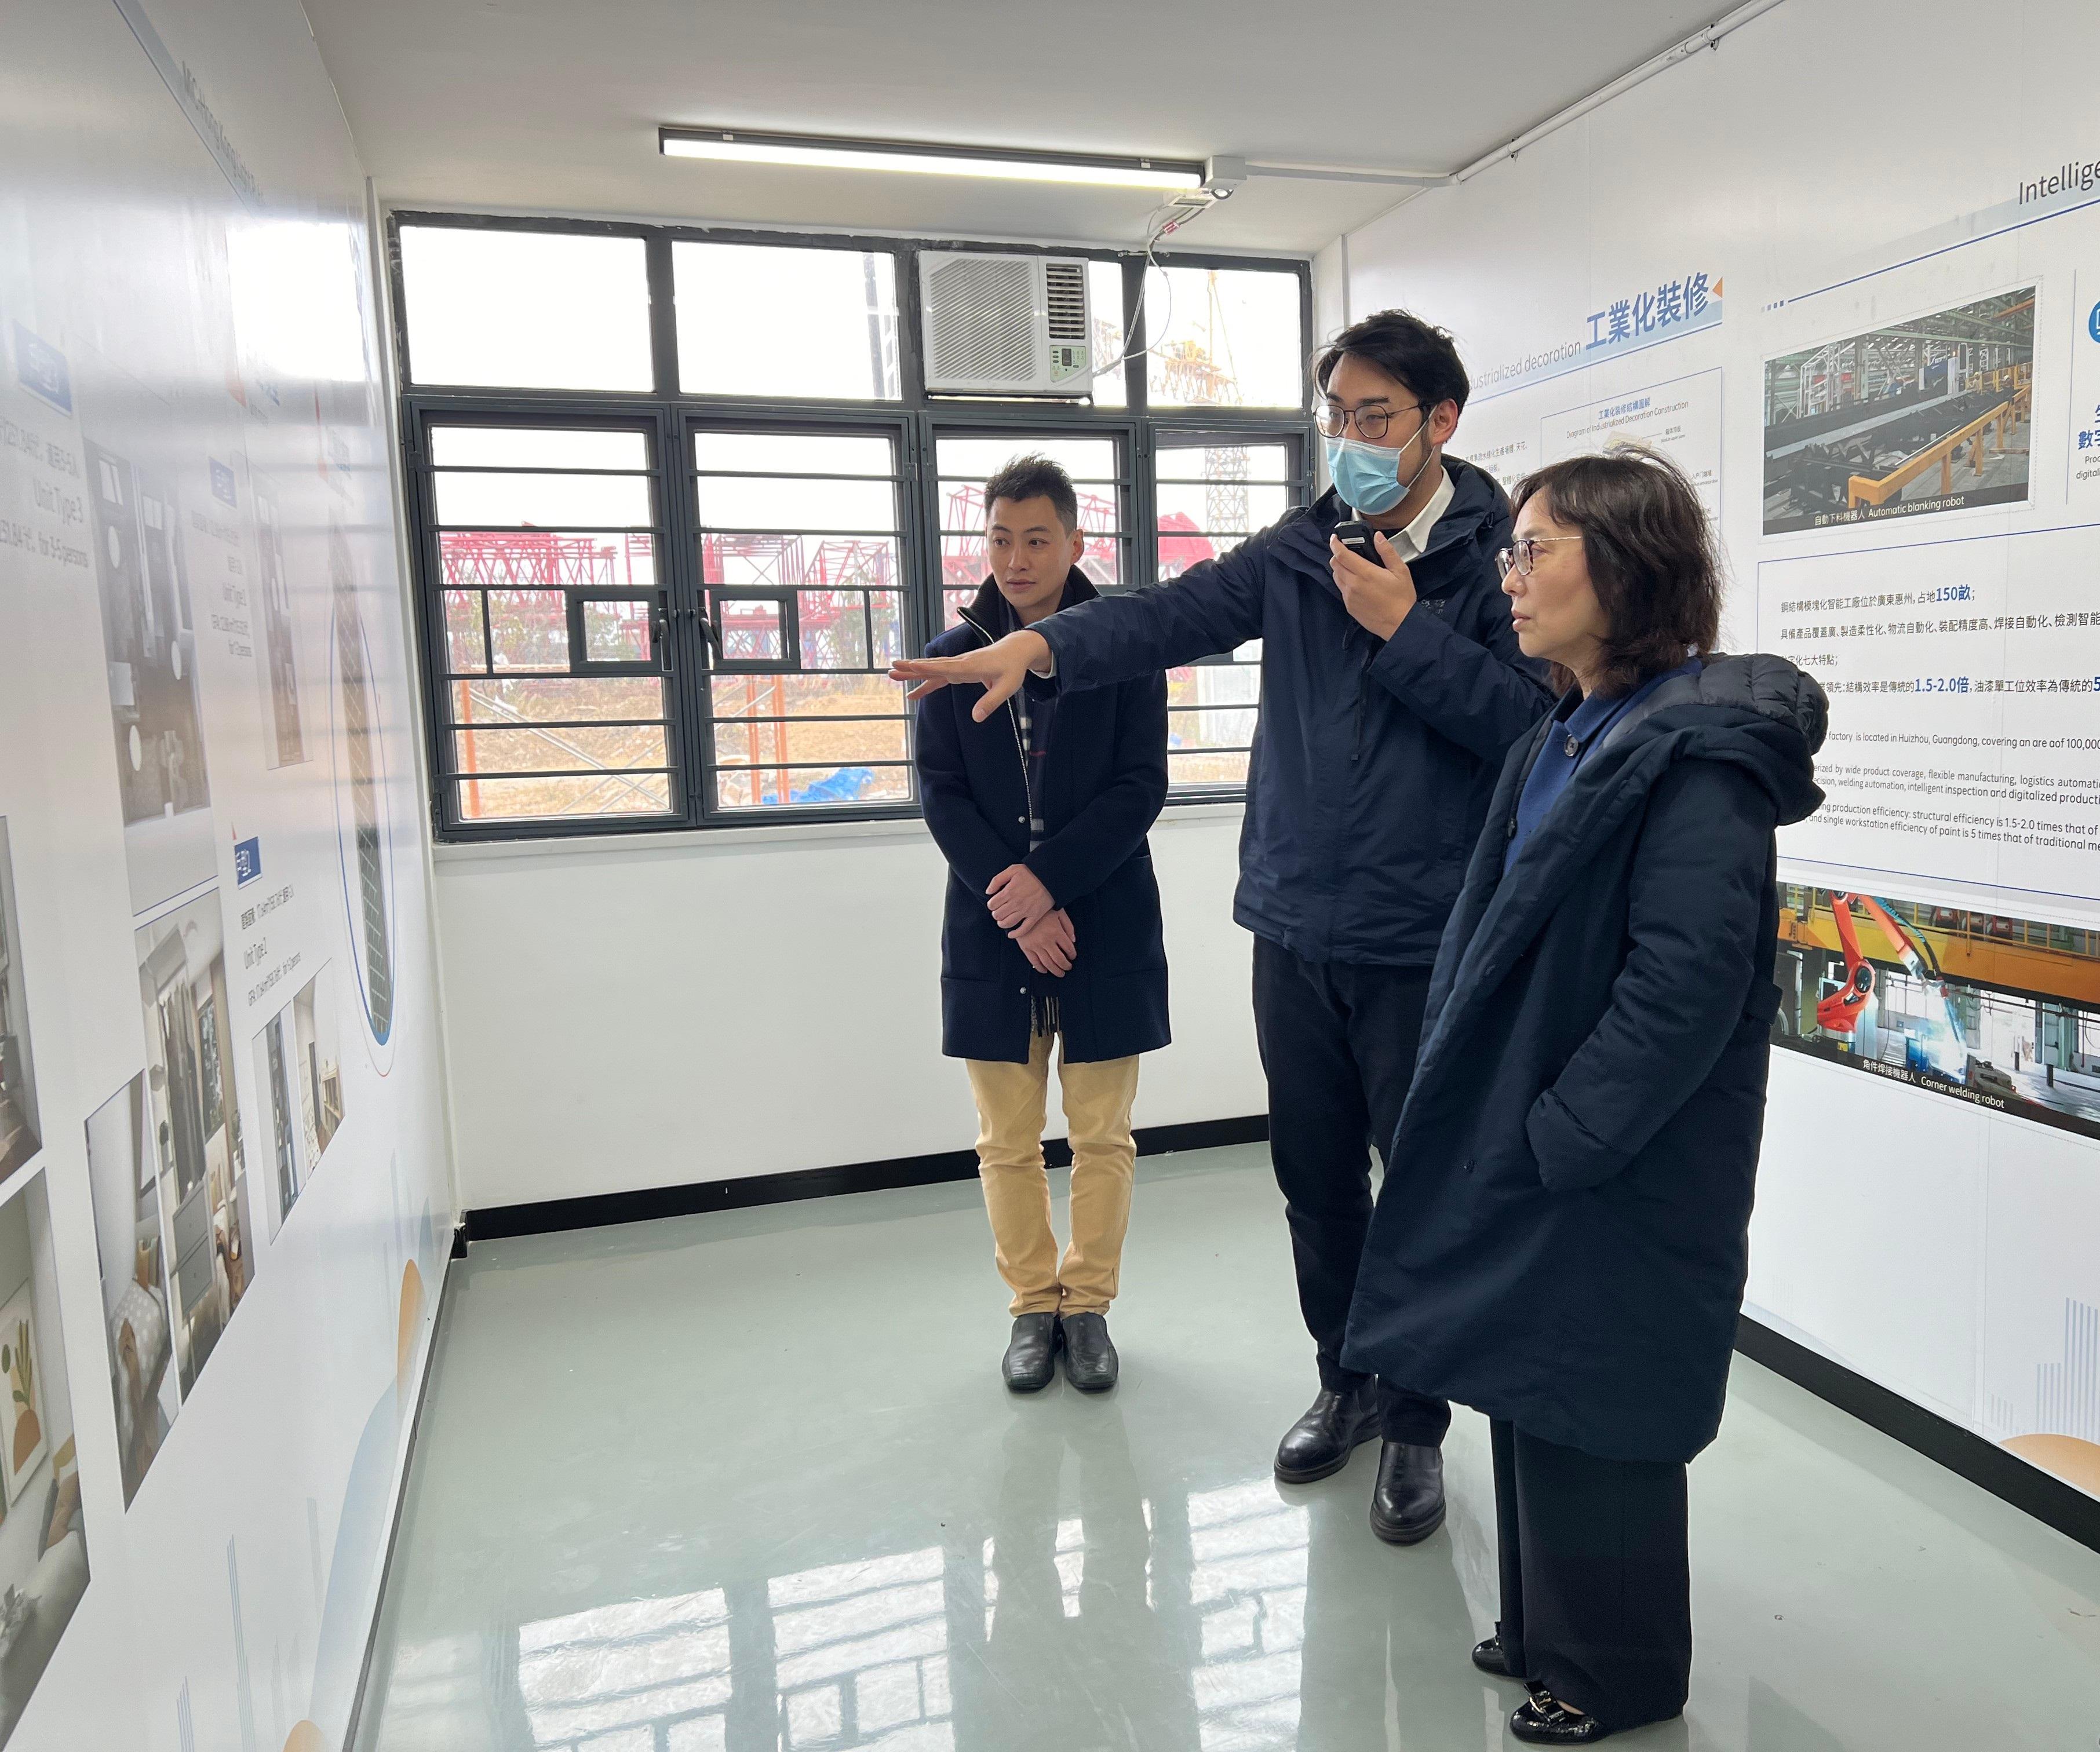 The Secretary for Development, Ms Bernadette Linn, attended the Modular Integrated Construction (MiC) Supply Chain Conference in Huizhou today (January 23). During her stay in Huizhou, Ms Linn inspected two manufacturing bases of MiC modules to learn about their operation and development. Photo show Ms Linn (right) being briefed on the research and development at China Construction Science and Industry Corporation Limited today.